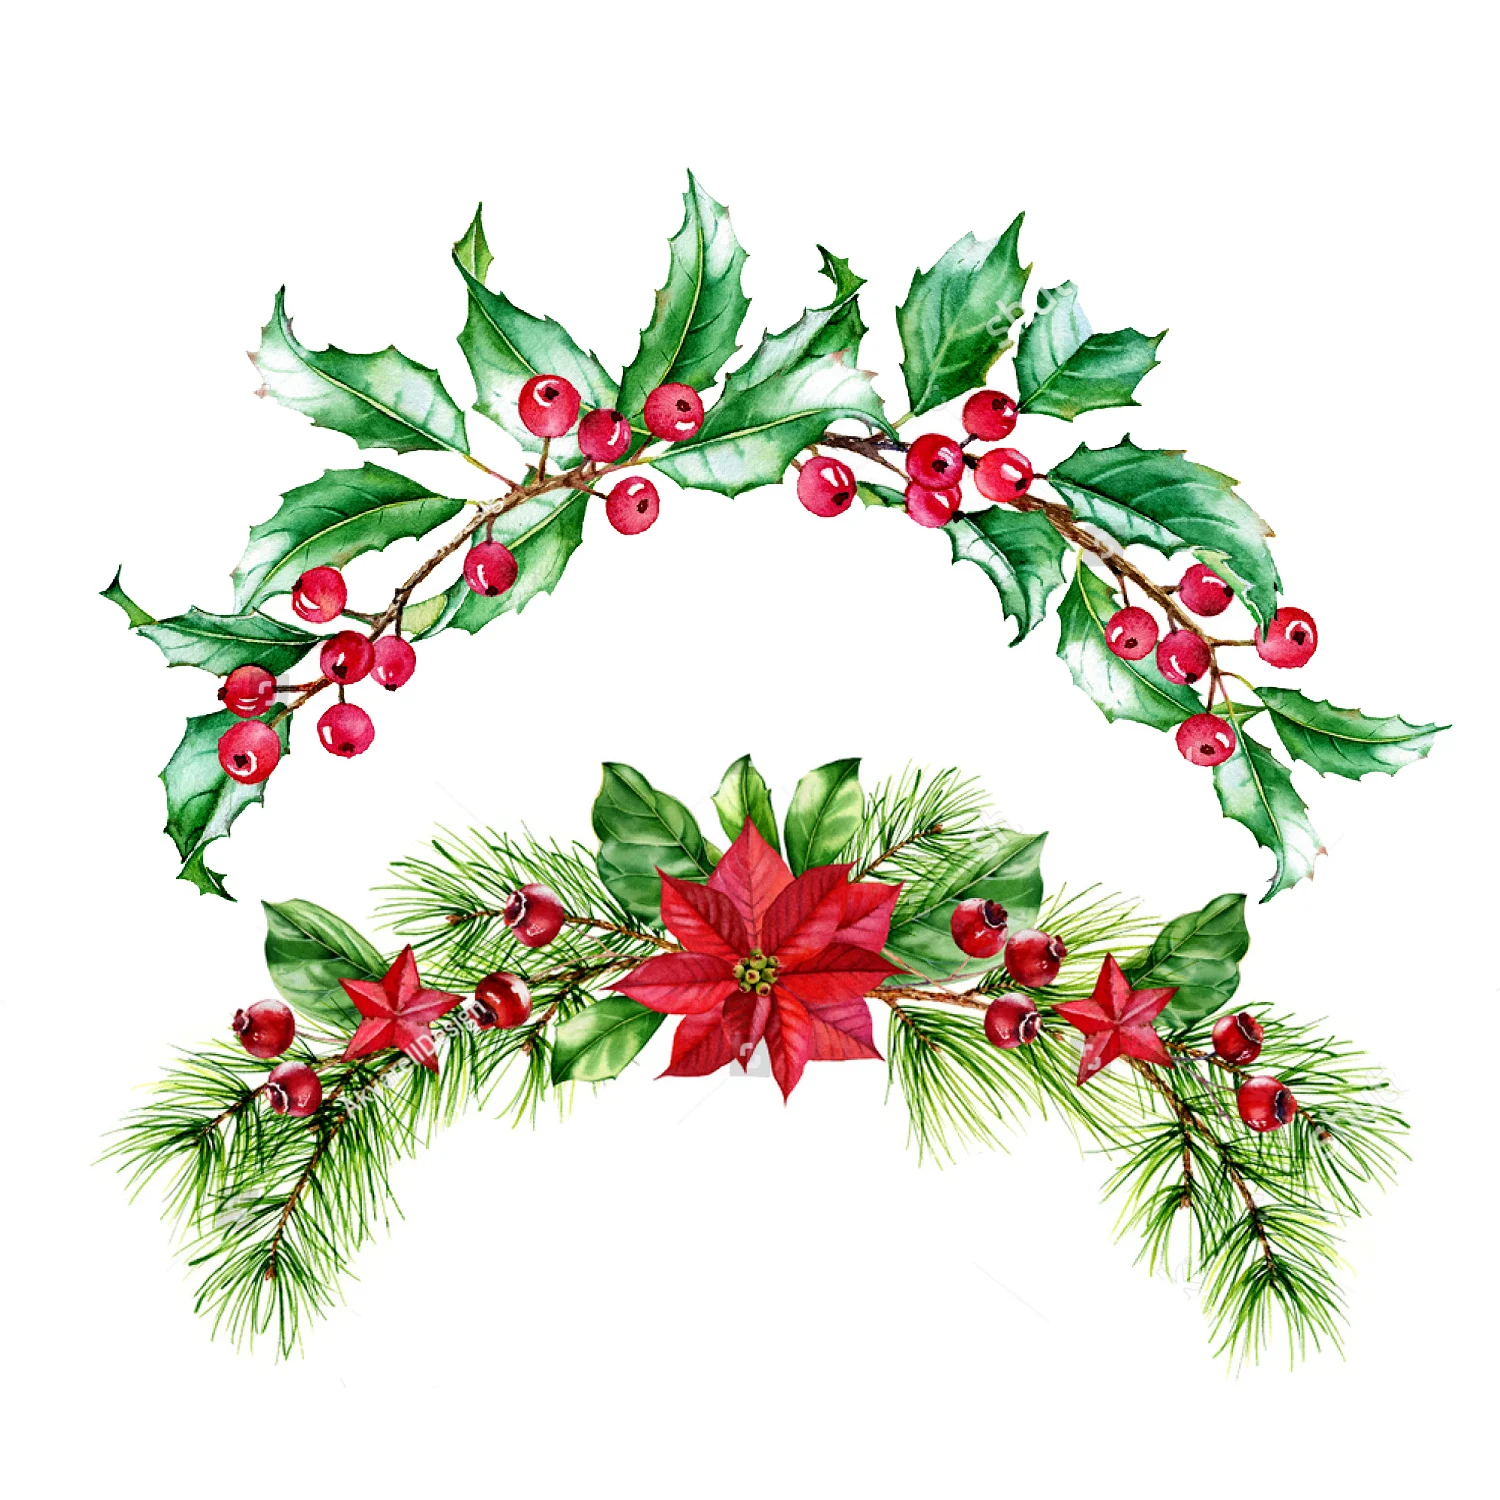 Christmas Flower Holly Garland Cutting Dies New Green Leaves Red Fruits Metal Embossing Stencil For Scrapbook Card Craft